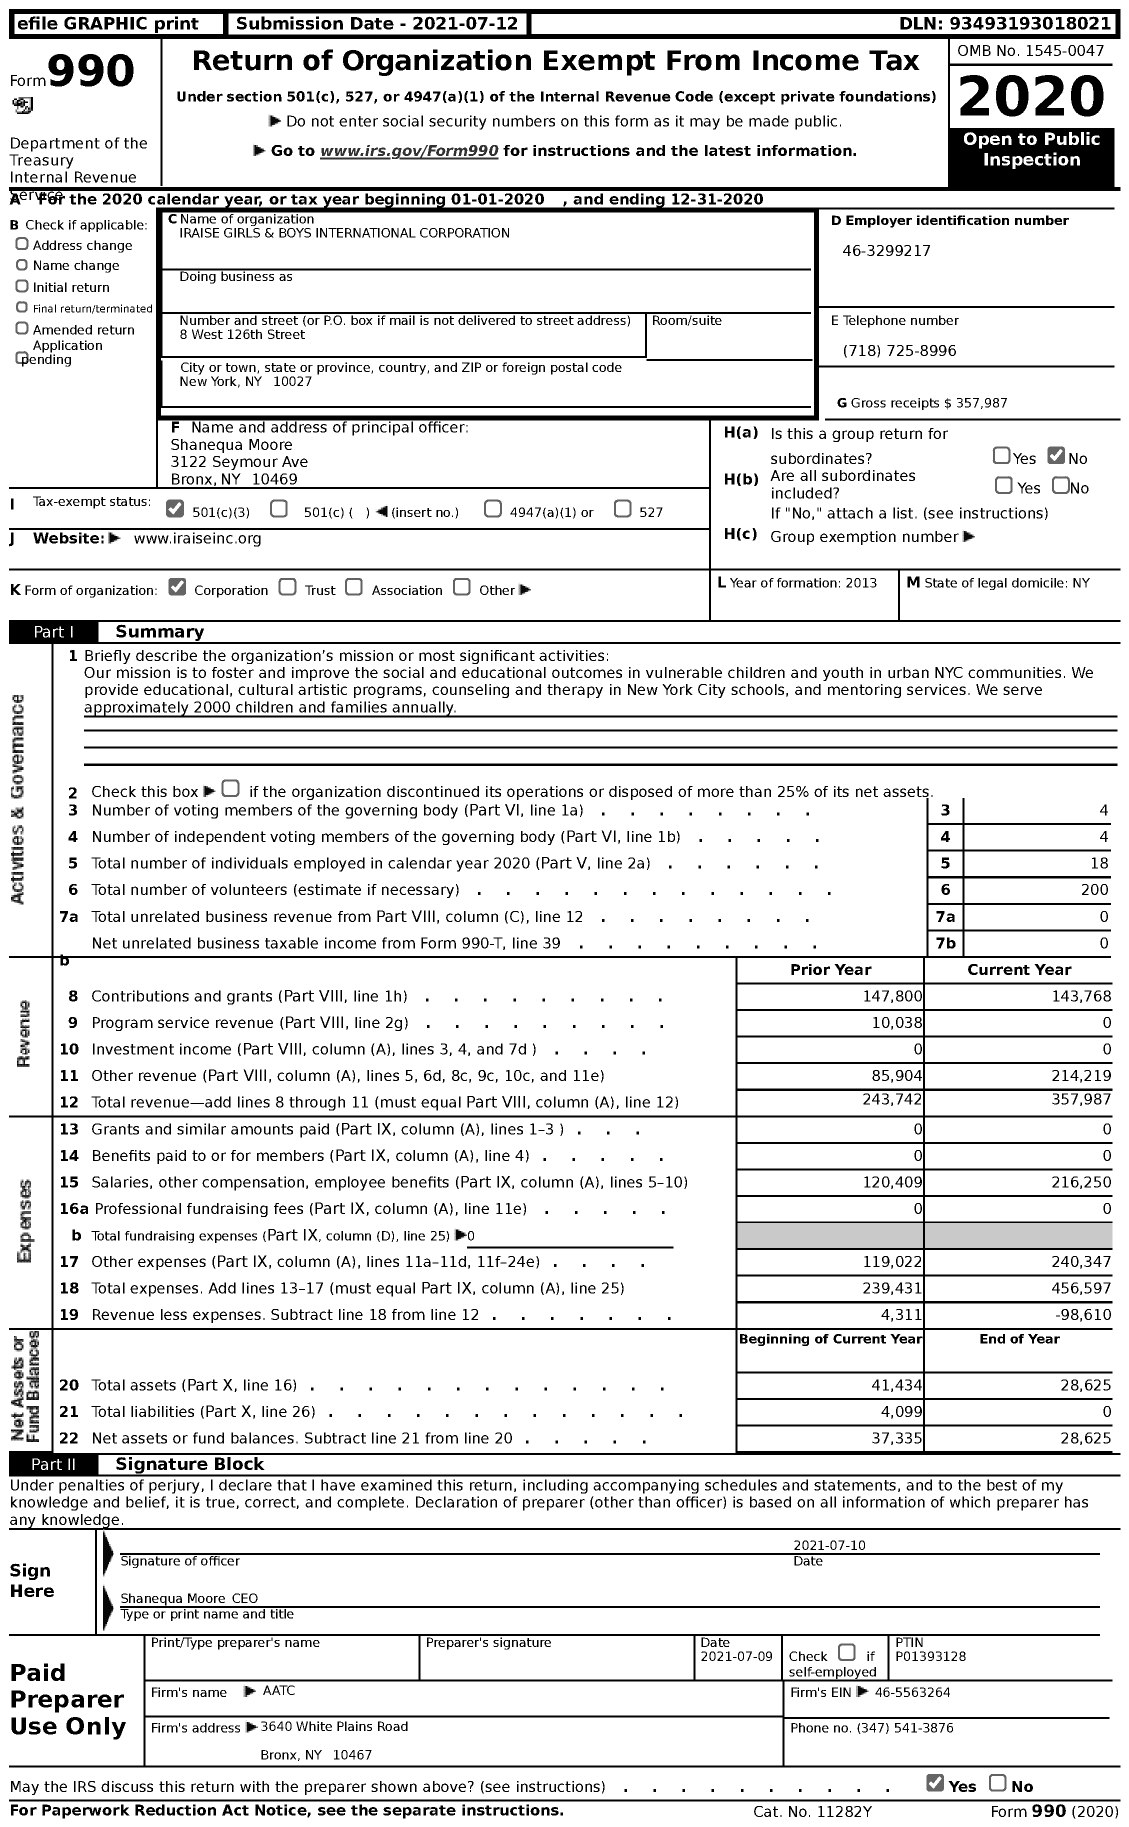 Image of first page of 2020 Form 990 for Iraise Girls and Boys International Corporation